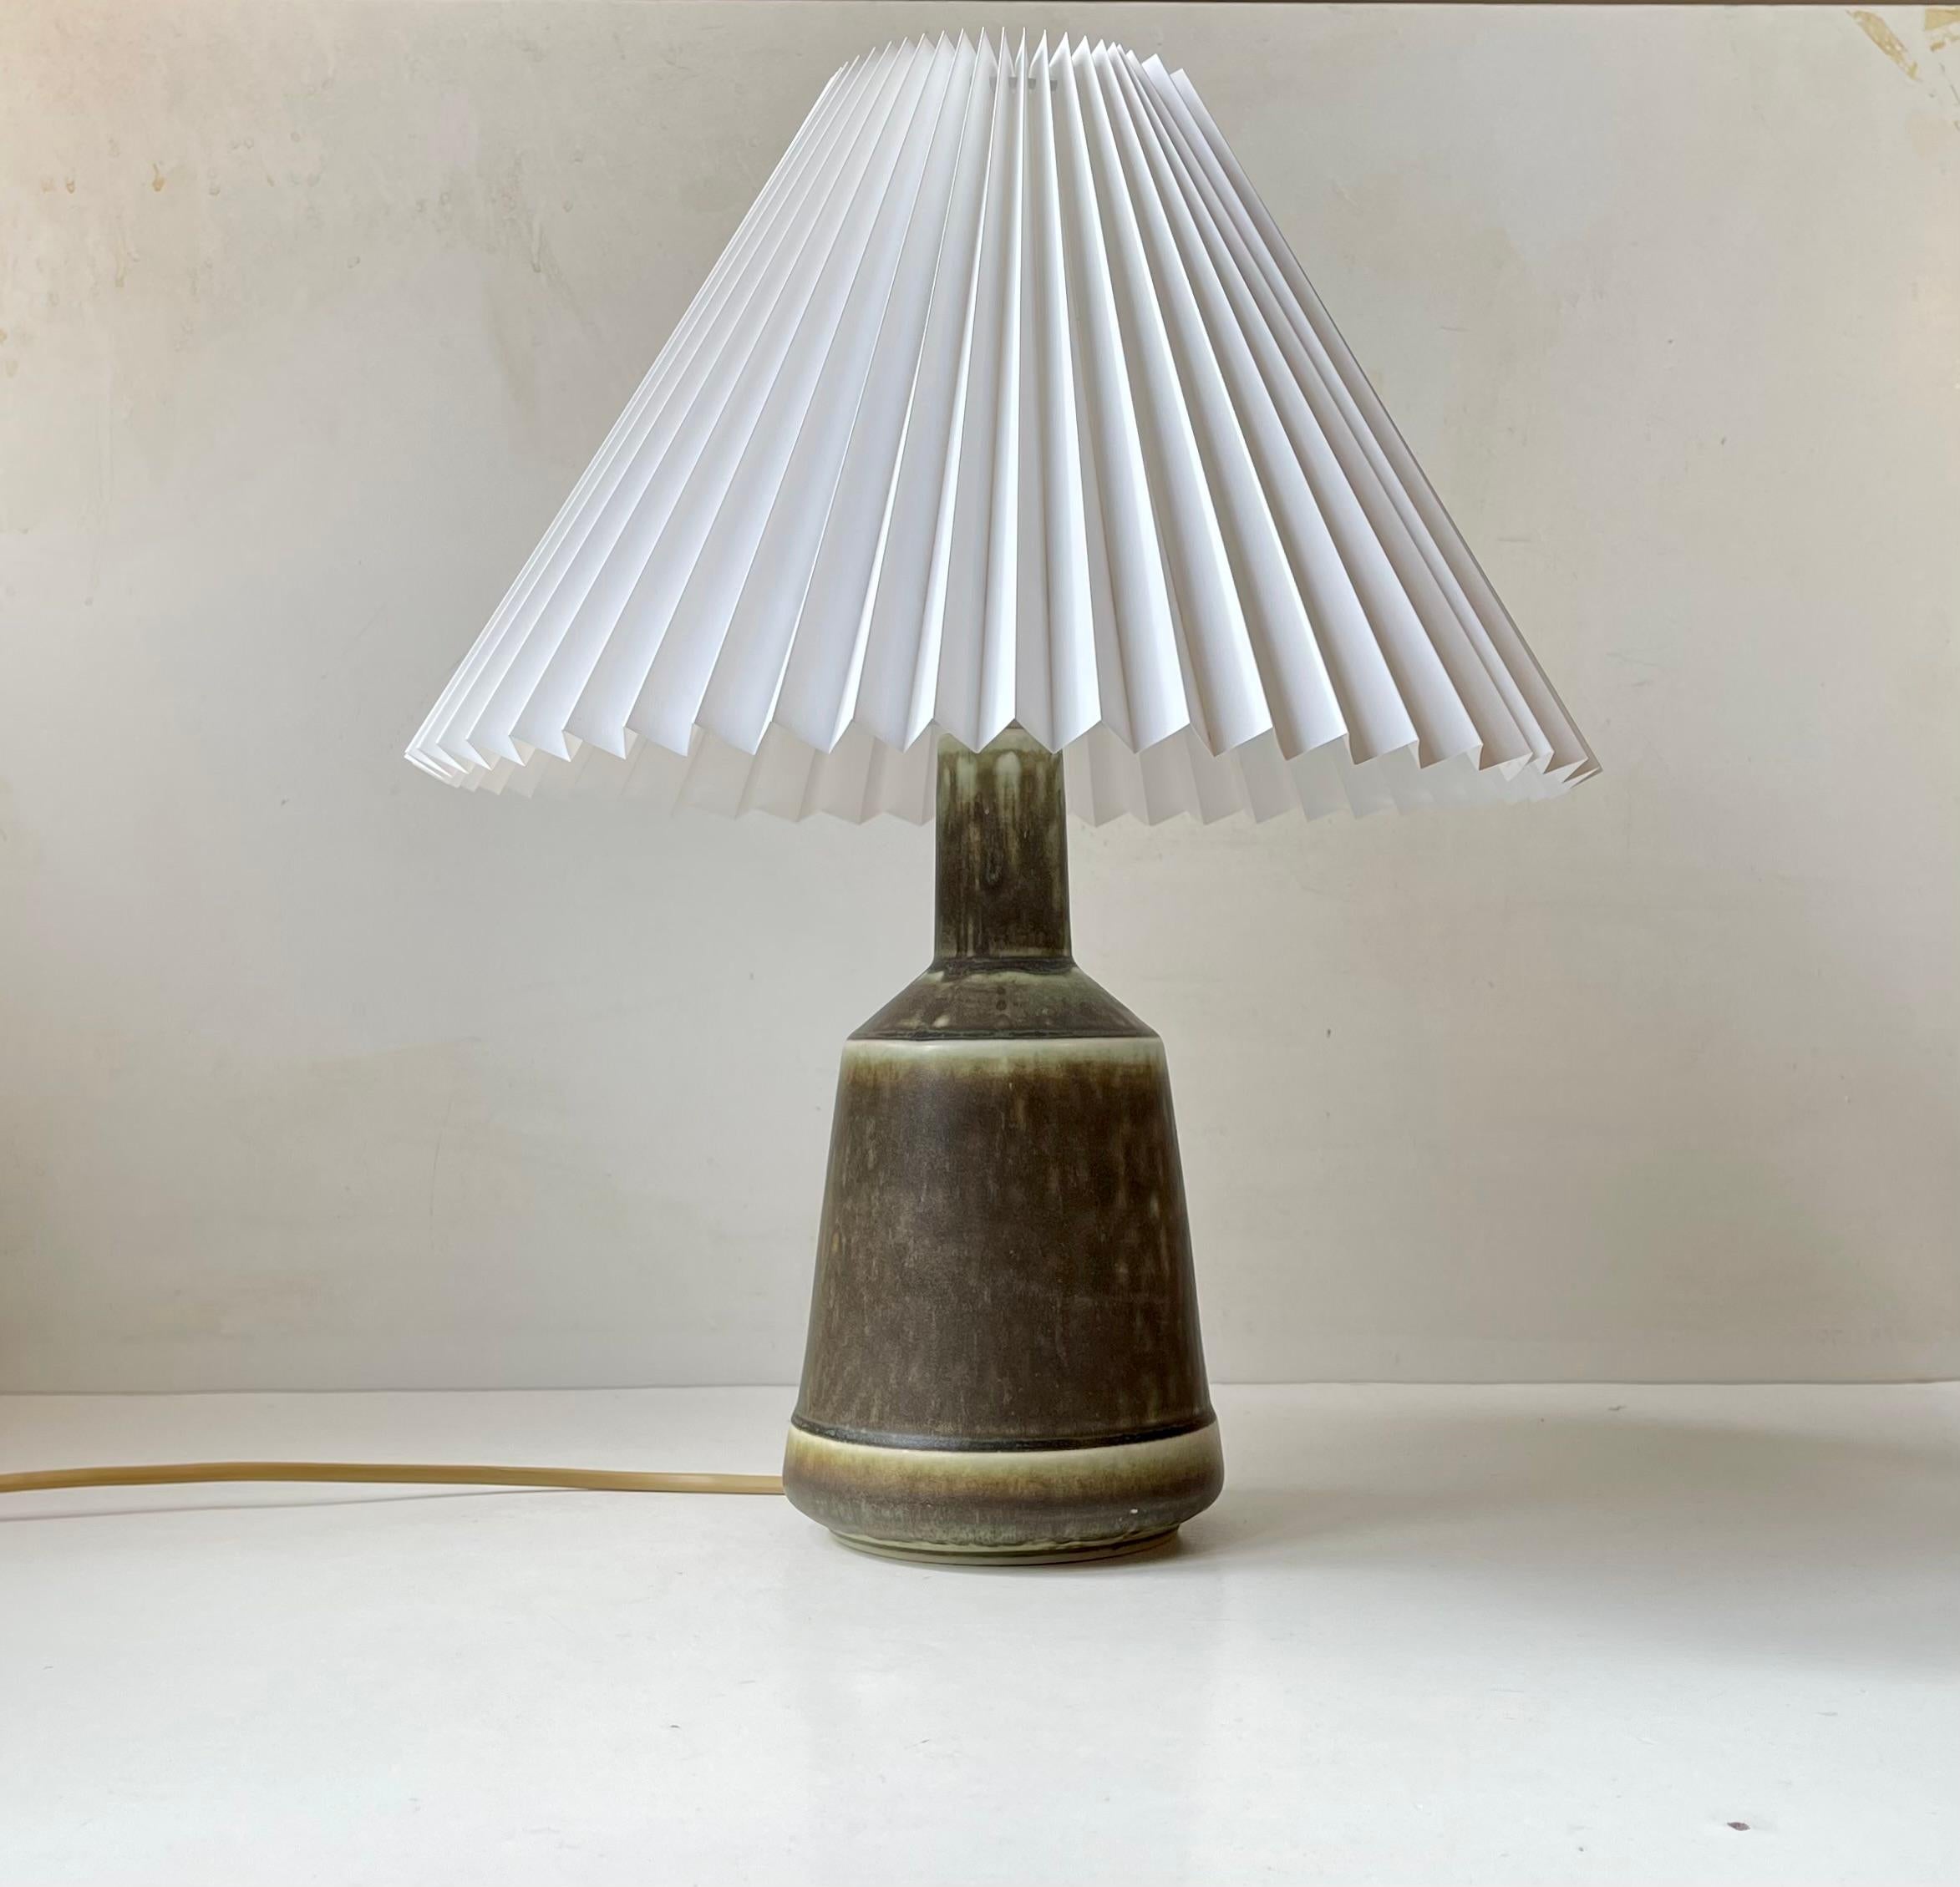 Exceptional stoneware table light from Danish Desiree Stentøj. It features a dusty hares-fur type olive green glaze that changes to a lighter delicate tone towards the edges. It original white socket has a pin on/of switch that hides just above the